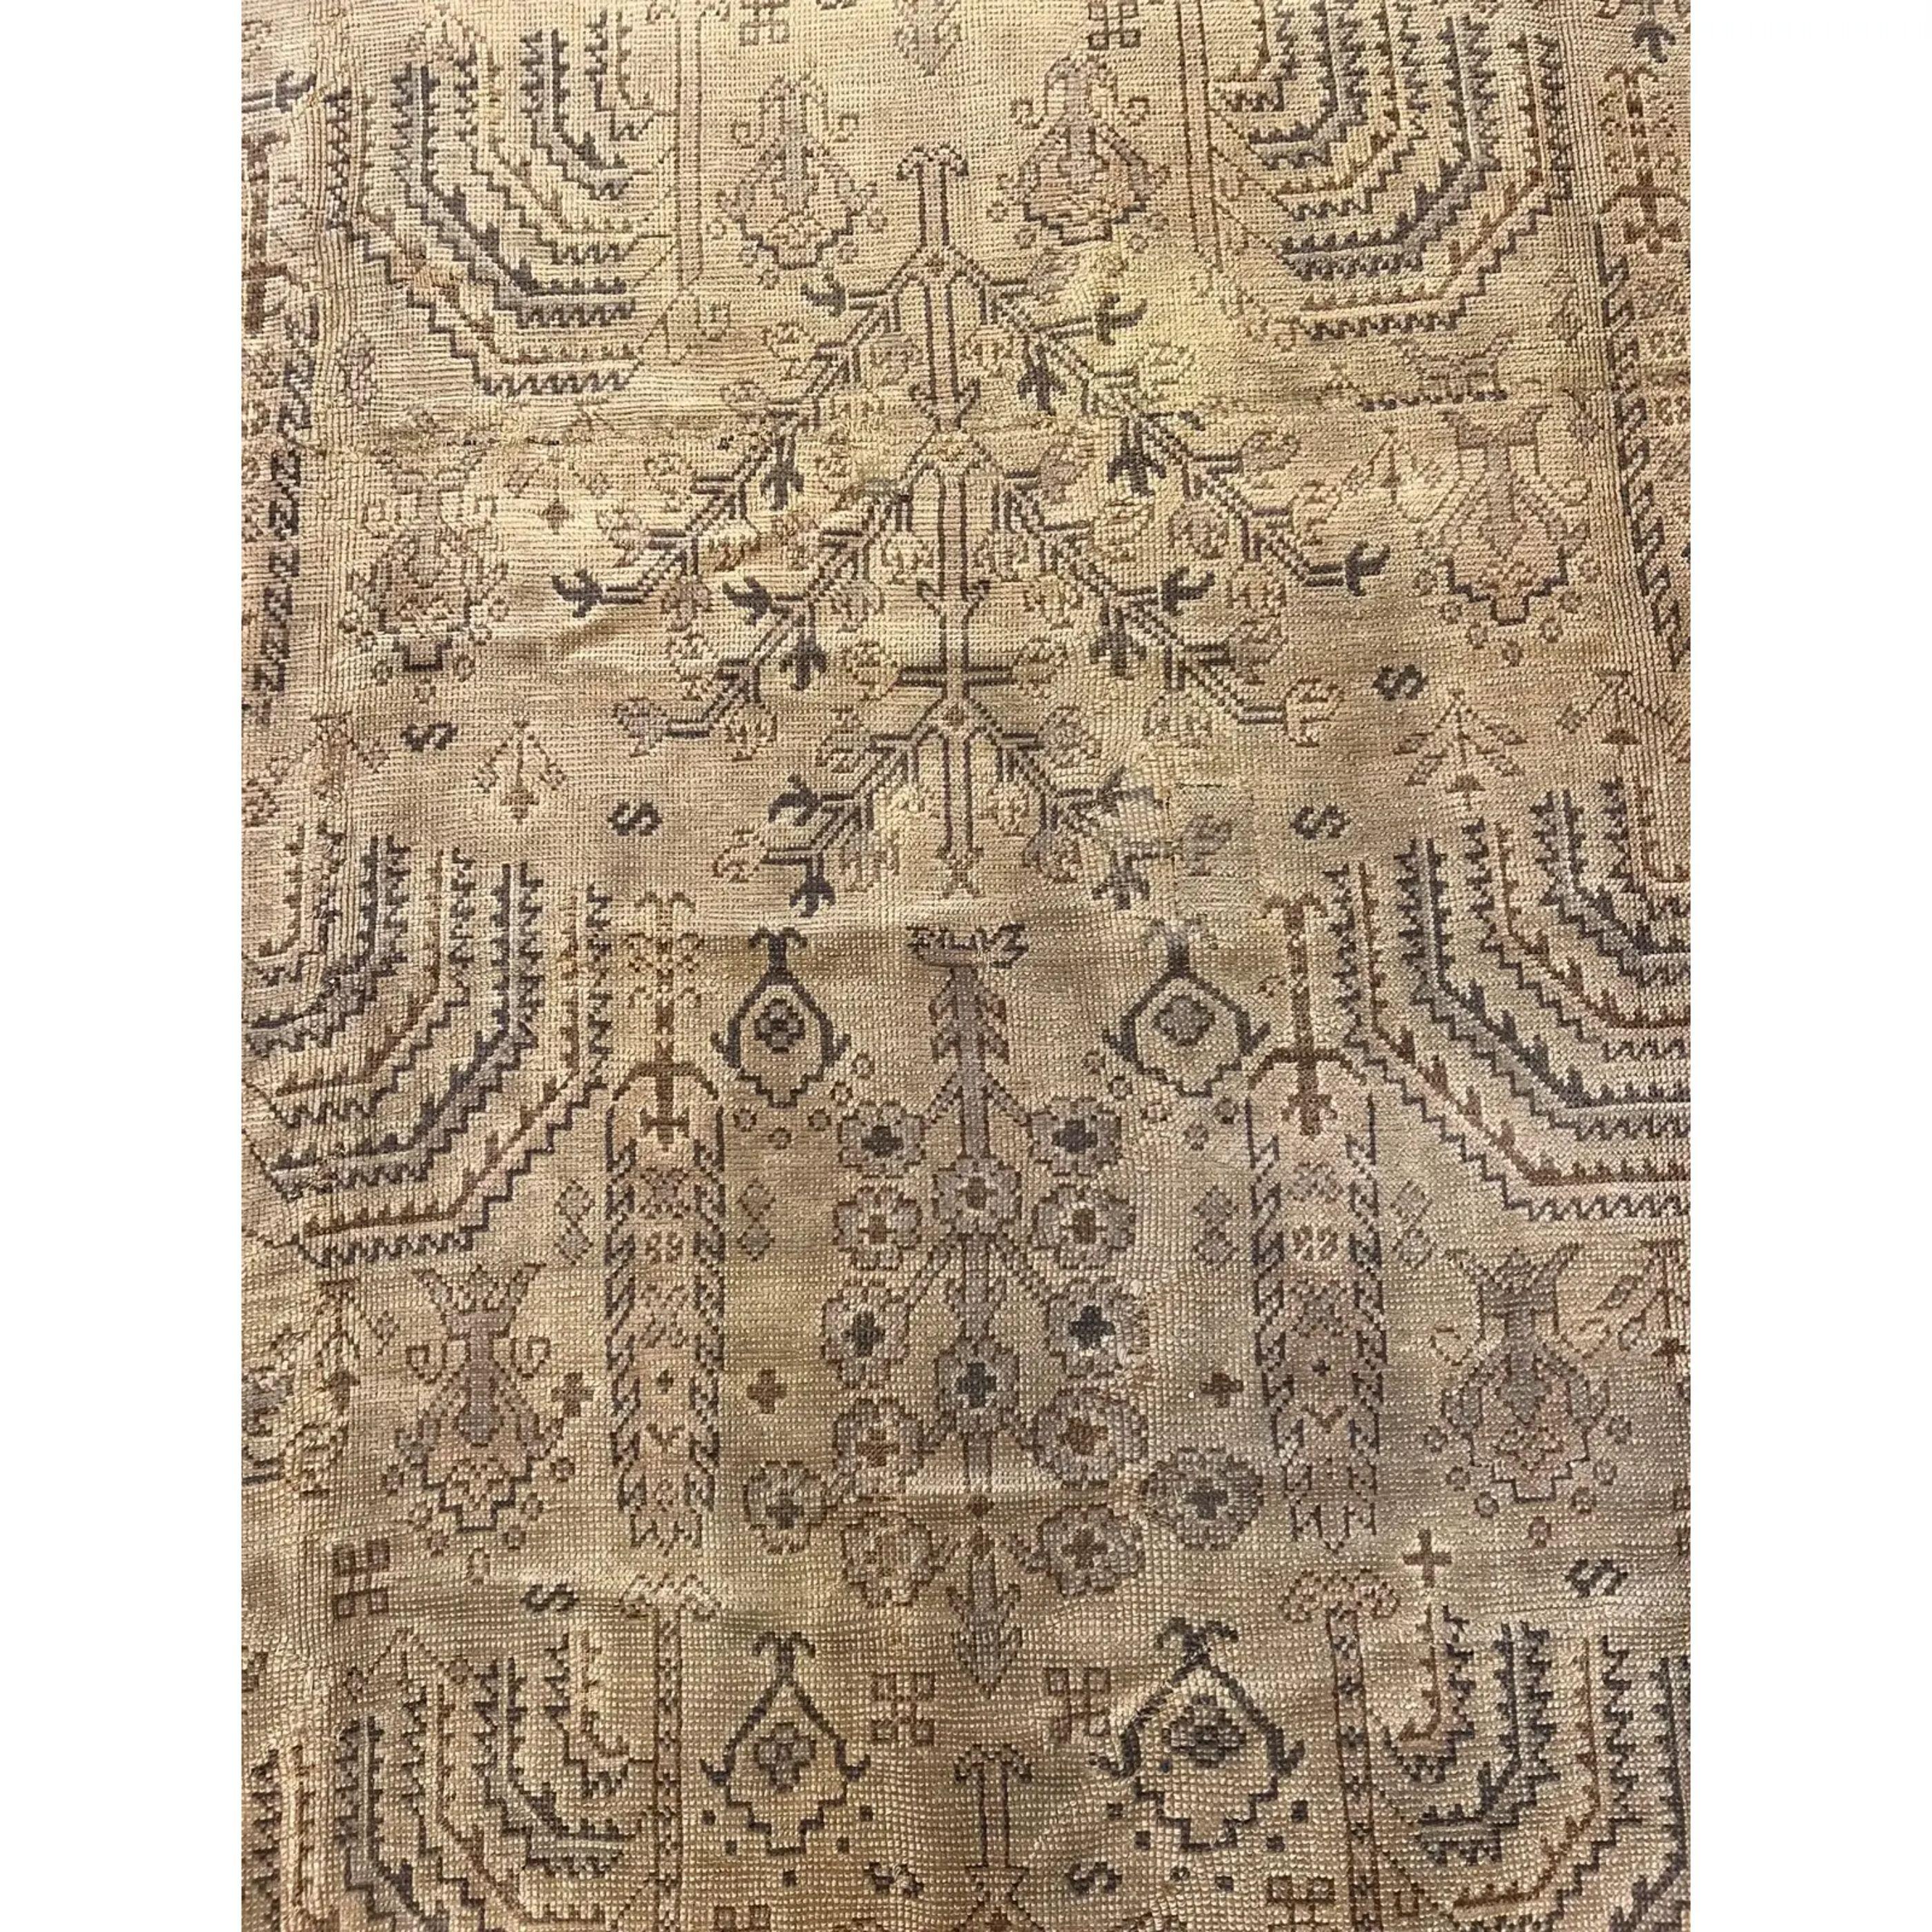 Antique Oushak Rug 15.4x11.5 In Good Condition For Sale In Los Angeles, US